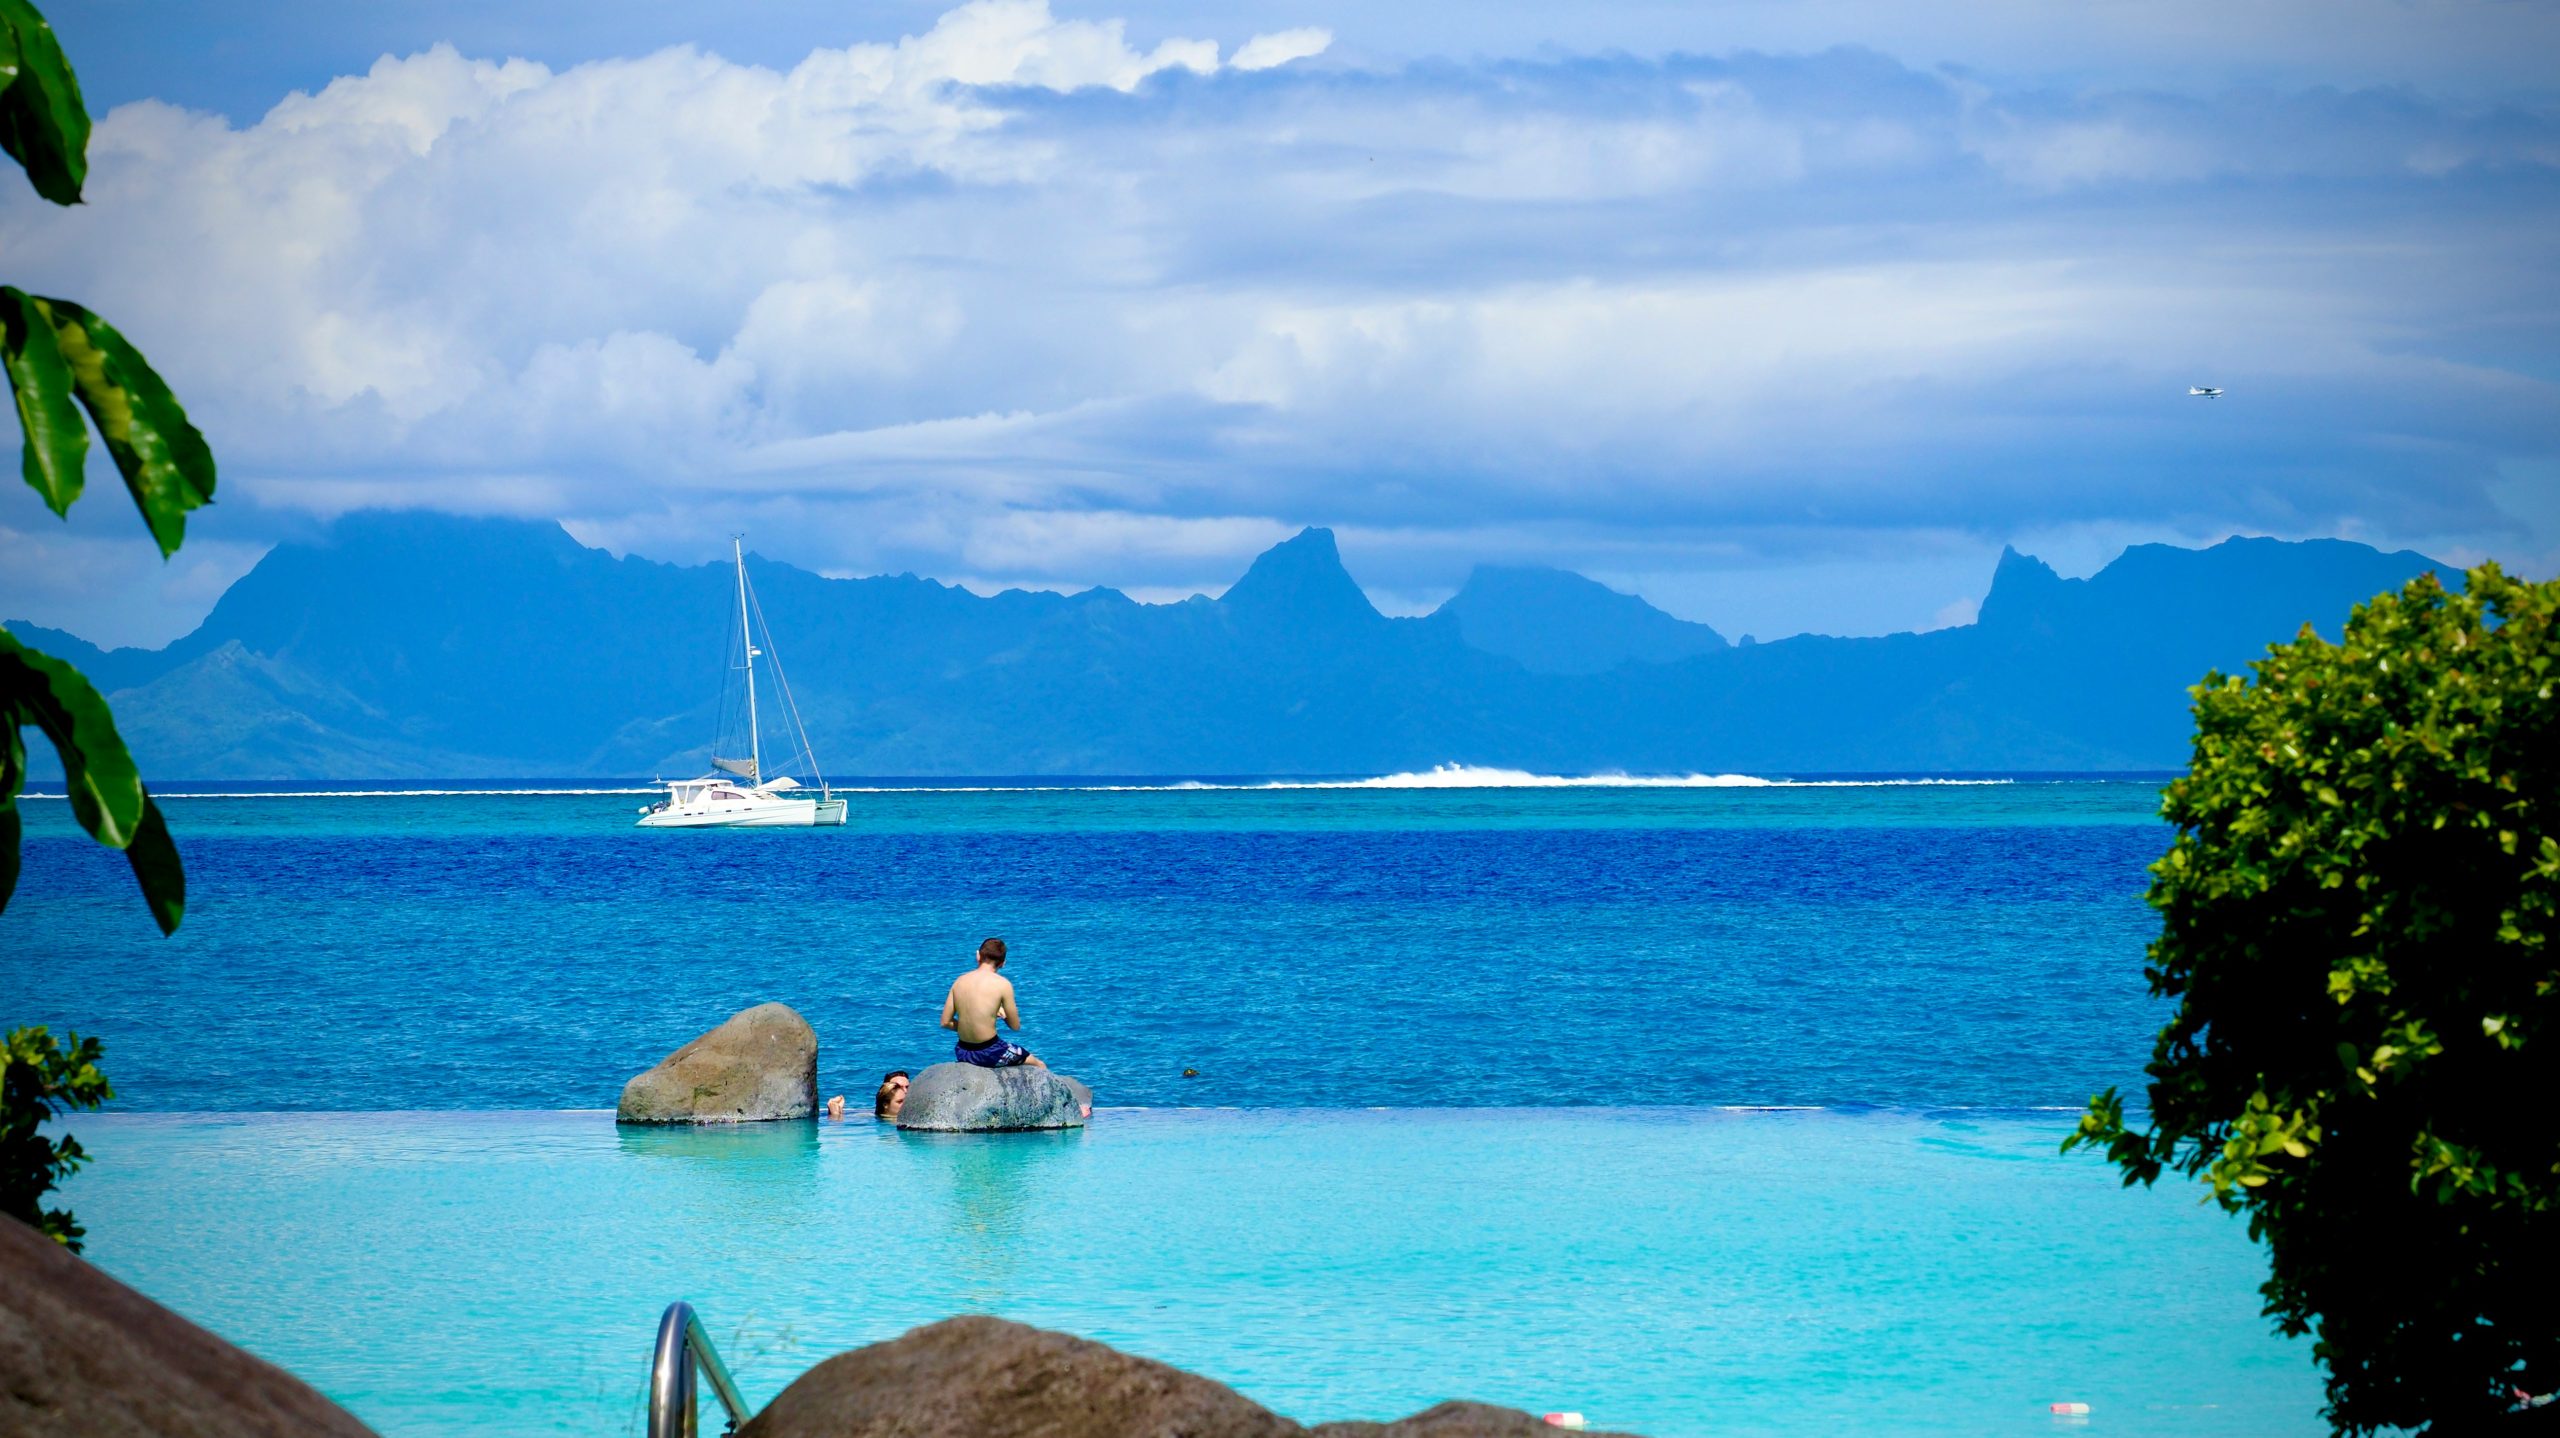 discover the pristine beauty of tahiti with our tourism guide. plan your dream vacation, explore stunning beaches, and immerse yourself in the vibrant culture of this tropical paradise.